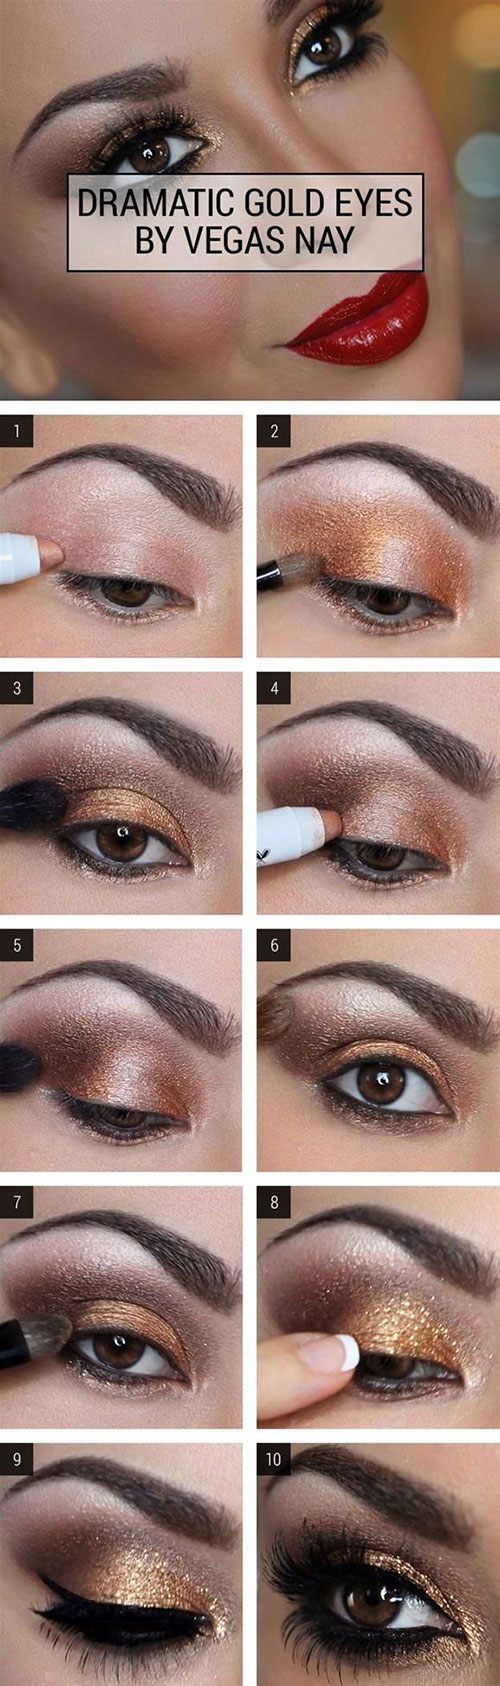 How To Create Smokey Eye Makeup How To Do Smokey Eye Makeup Top 10 Tutorial Pictures For 2019